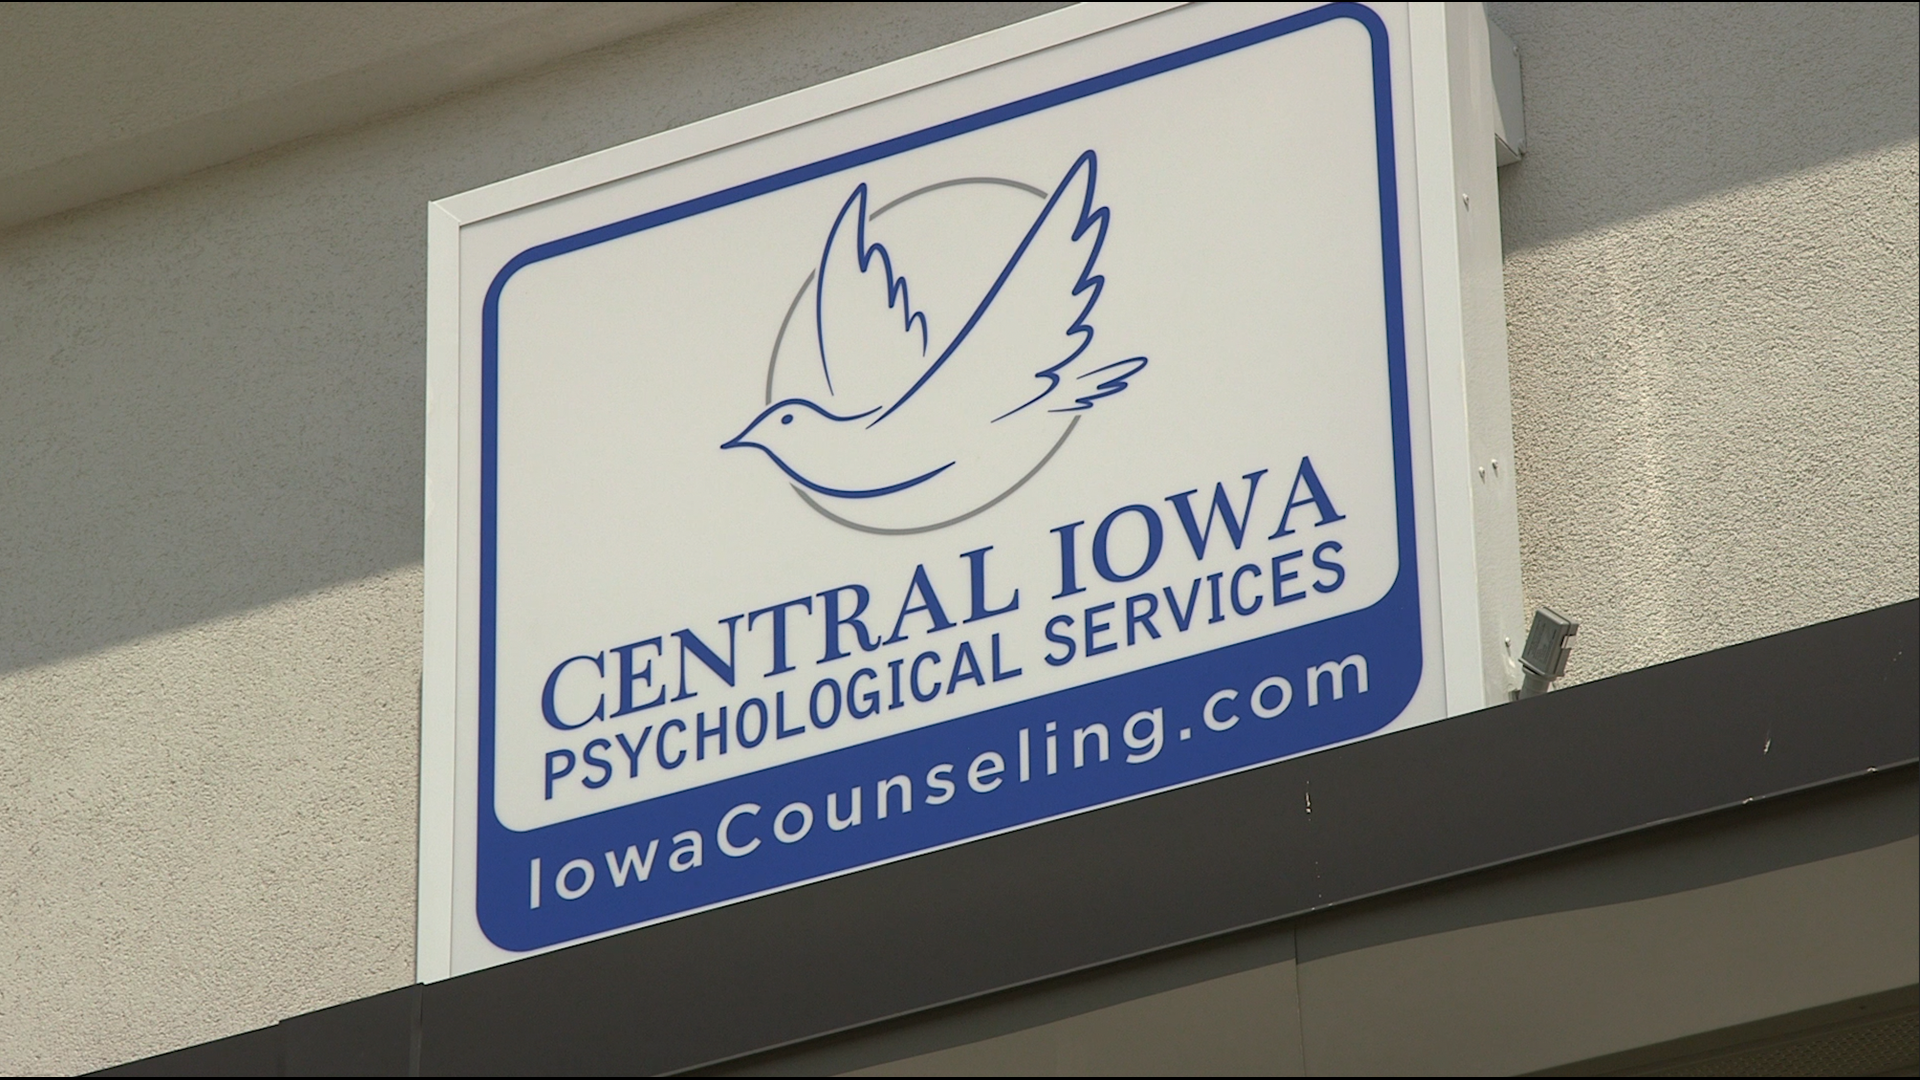 Medical practices across Iowa can now enroll in the Psychiatric and Behavior Health Consultation (PBHC) Program for free.